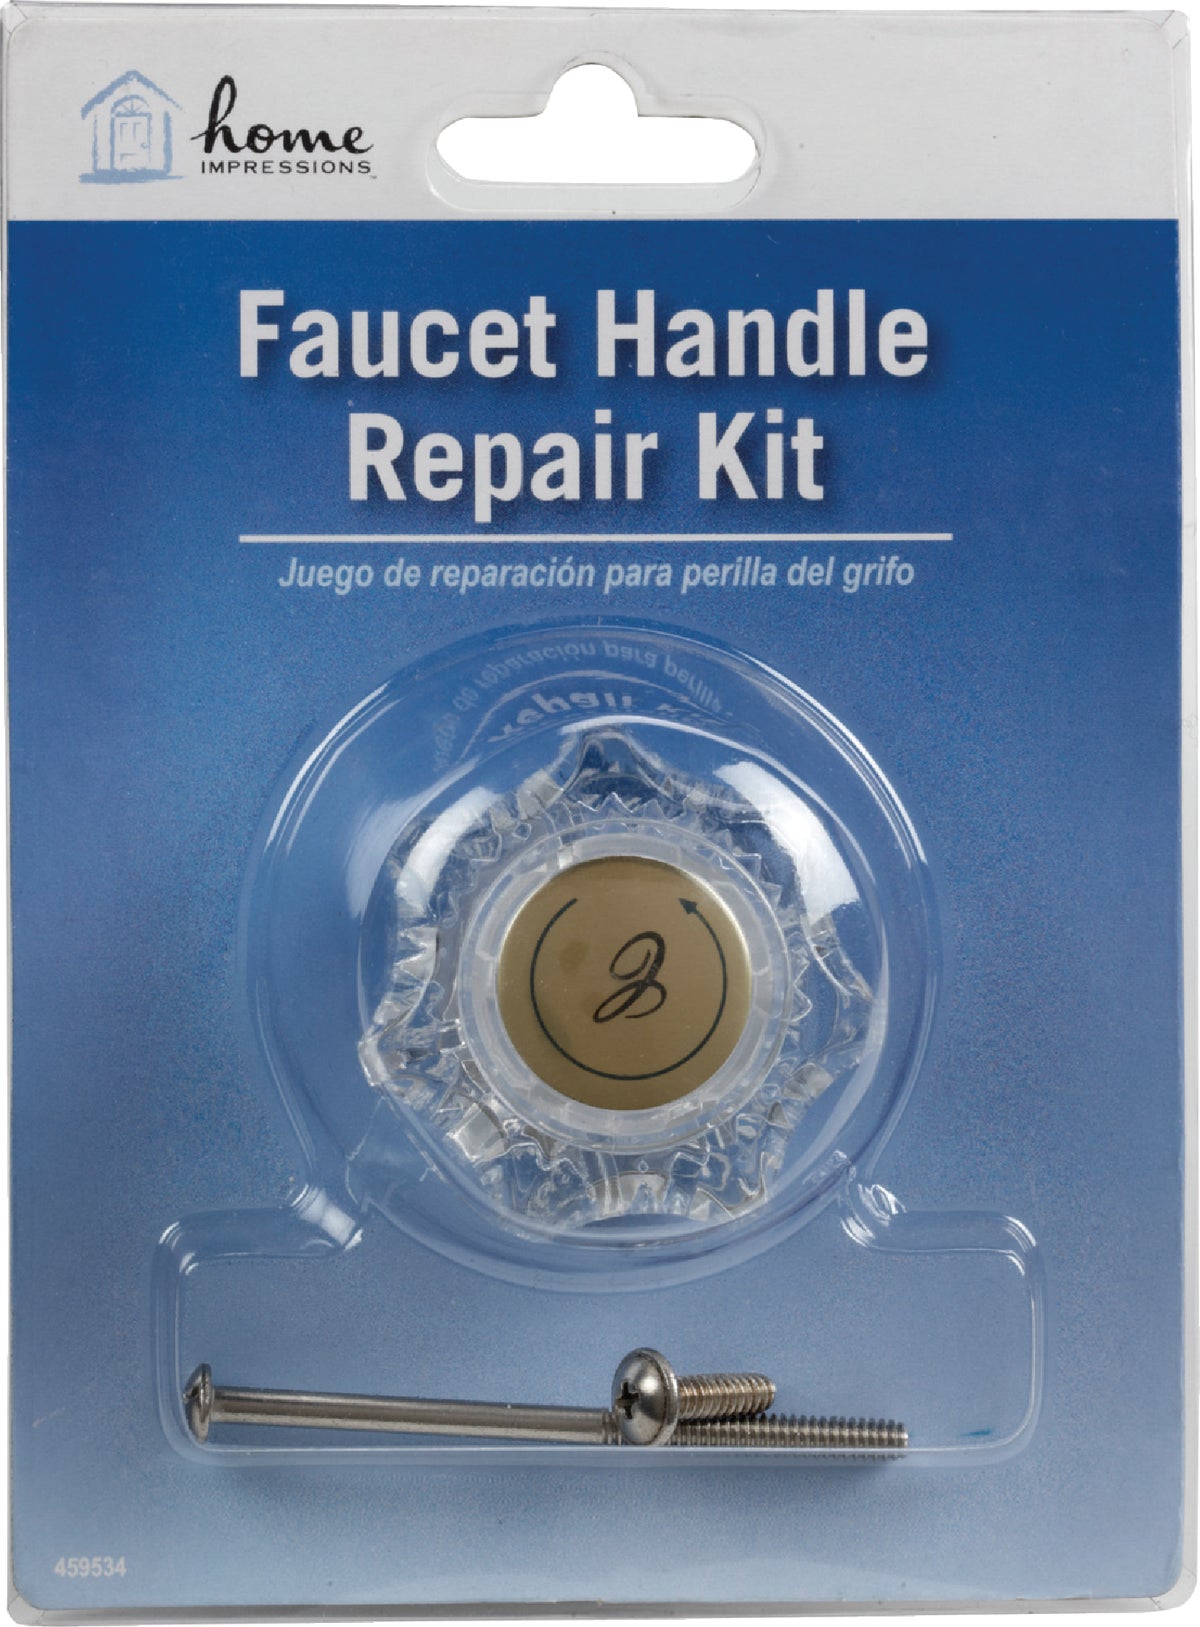 Home Impressions Acrylic Faucet Handle Repair Kit A662001CP-JPF1 